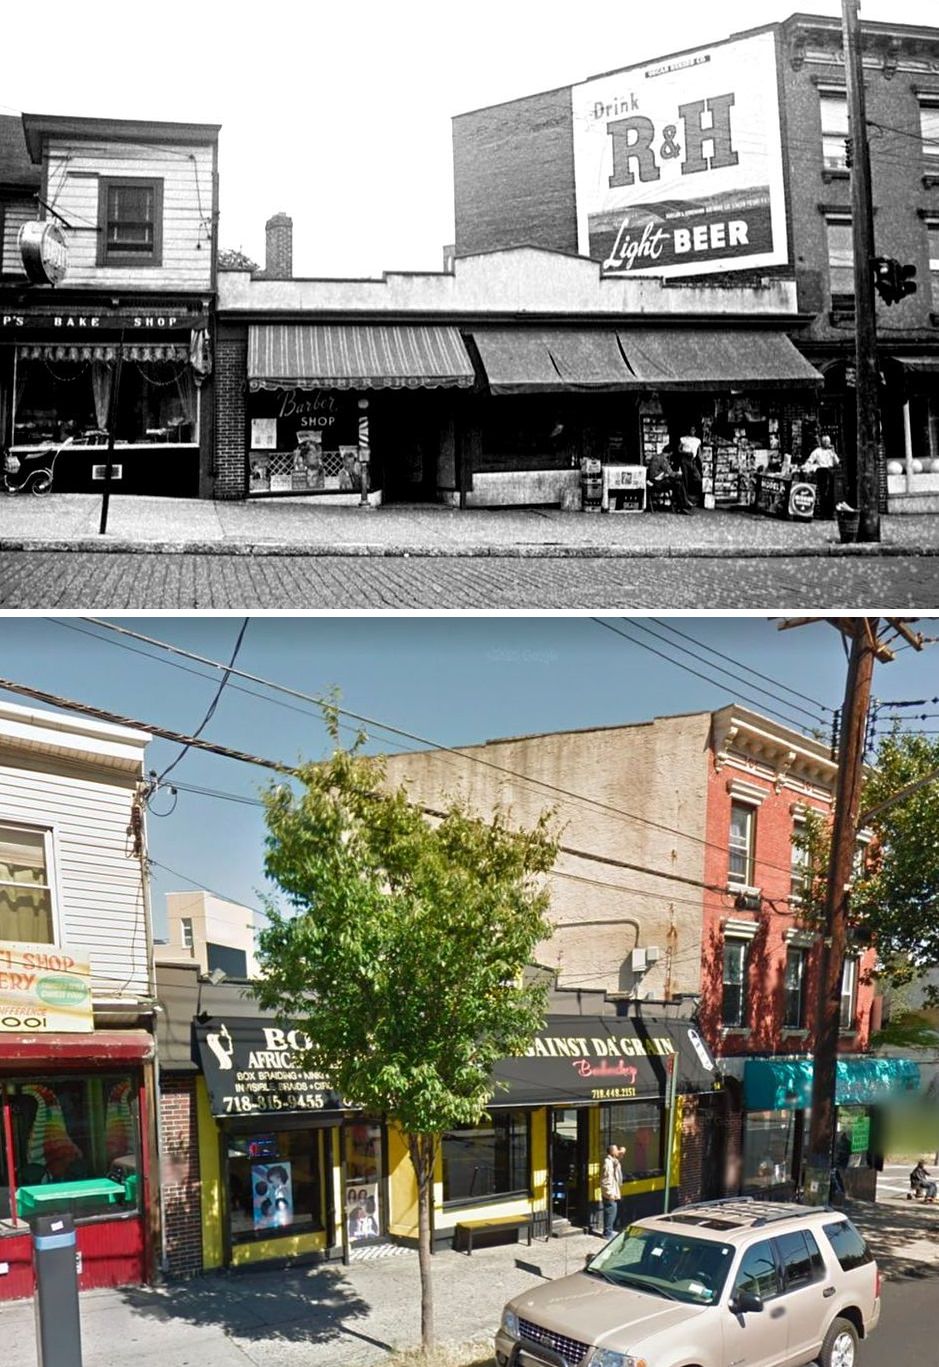 A 1939-41 Snapshot Of Stores At 61-63 Victory Boulevard, Including Rubsam And Horrmann Beer, A Bake Shop, And More. Second Photo Is From 2018